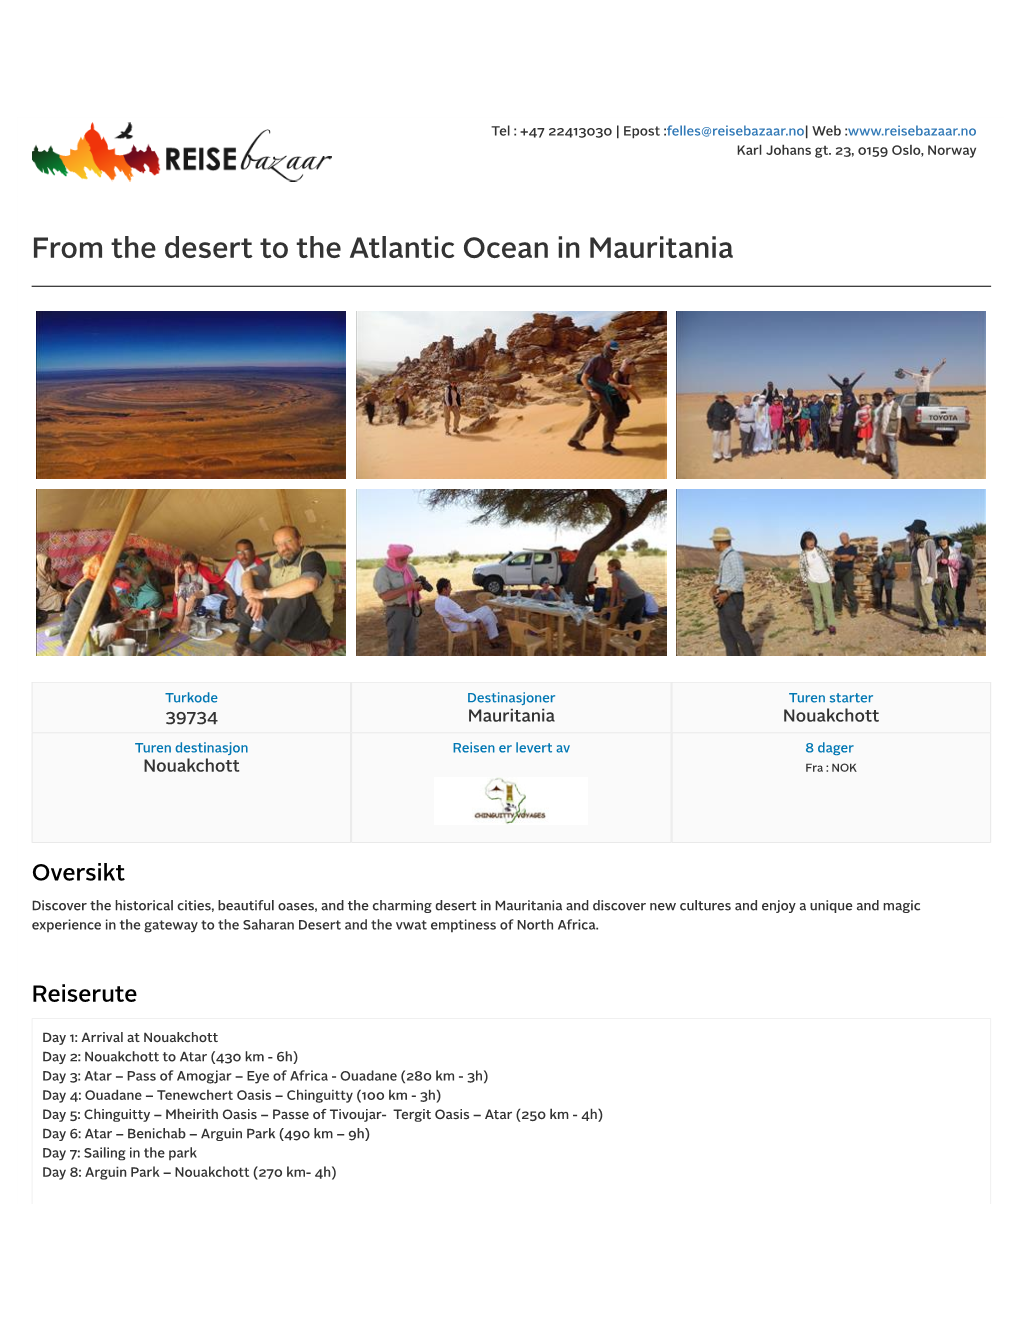 From the Desert to the Atlantic Ocean in Mauritania